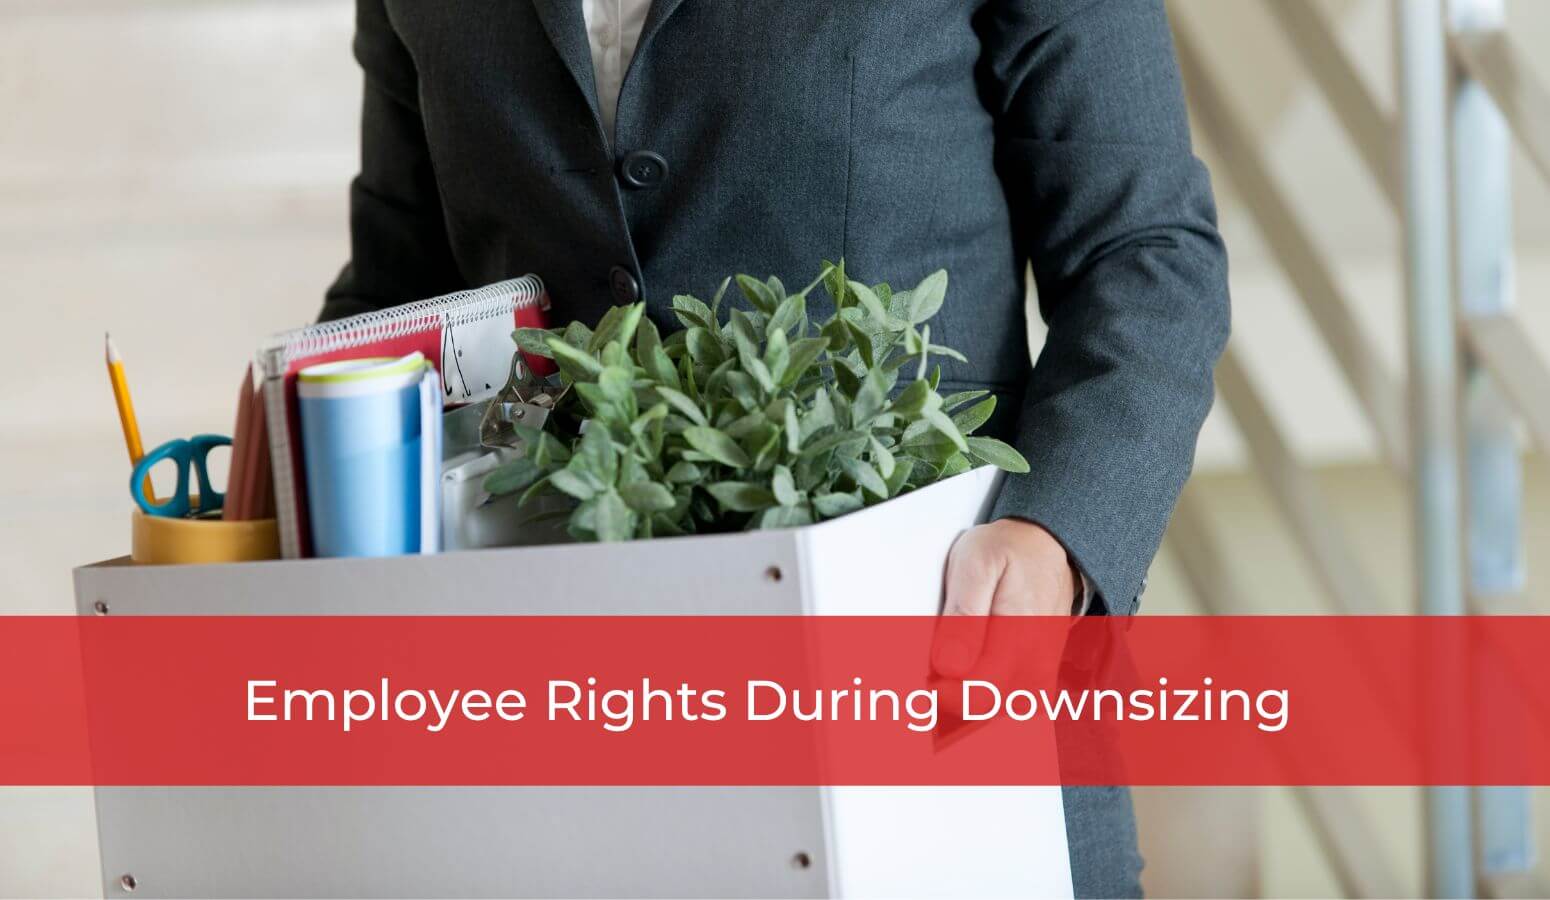 Featured image for “Employee Rights During Downsizing”